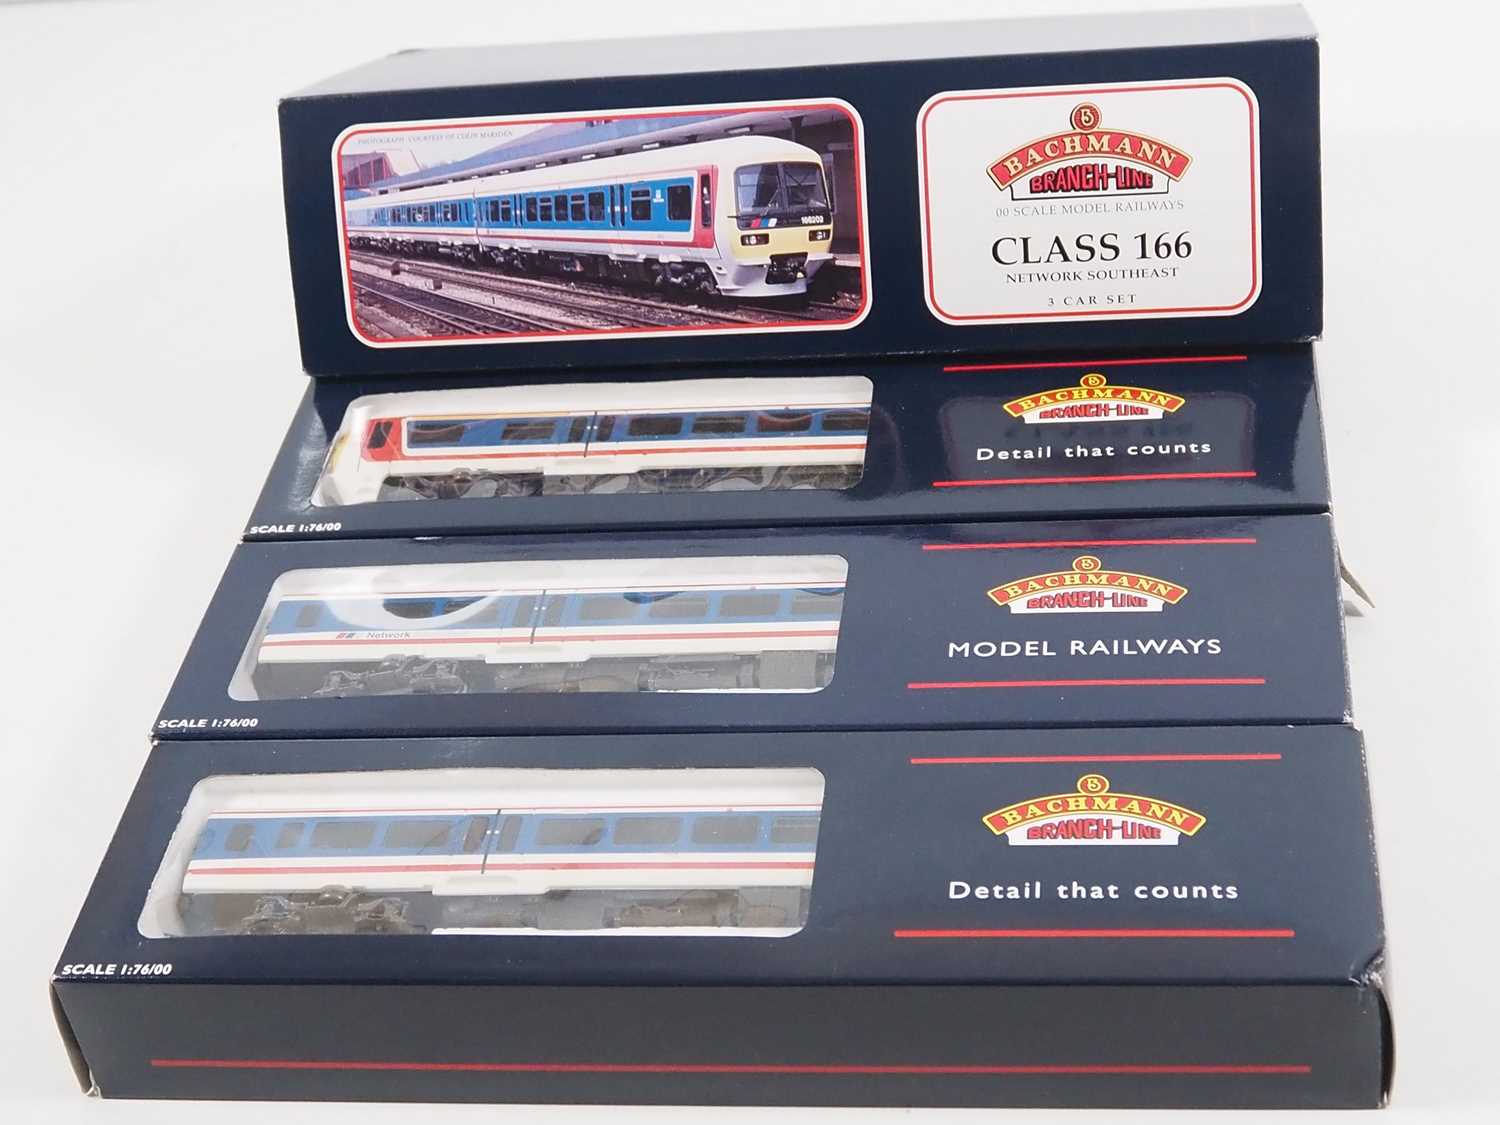 A BACHMANN 31-025 OO gauge 3 car class 166 Networker DMU in Network South East livery - VG in